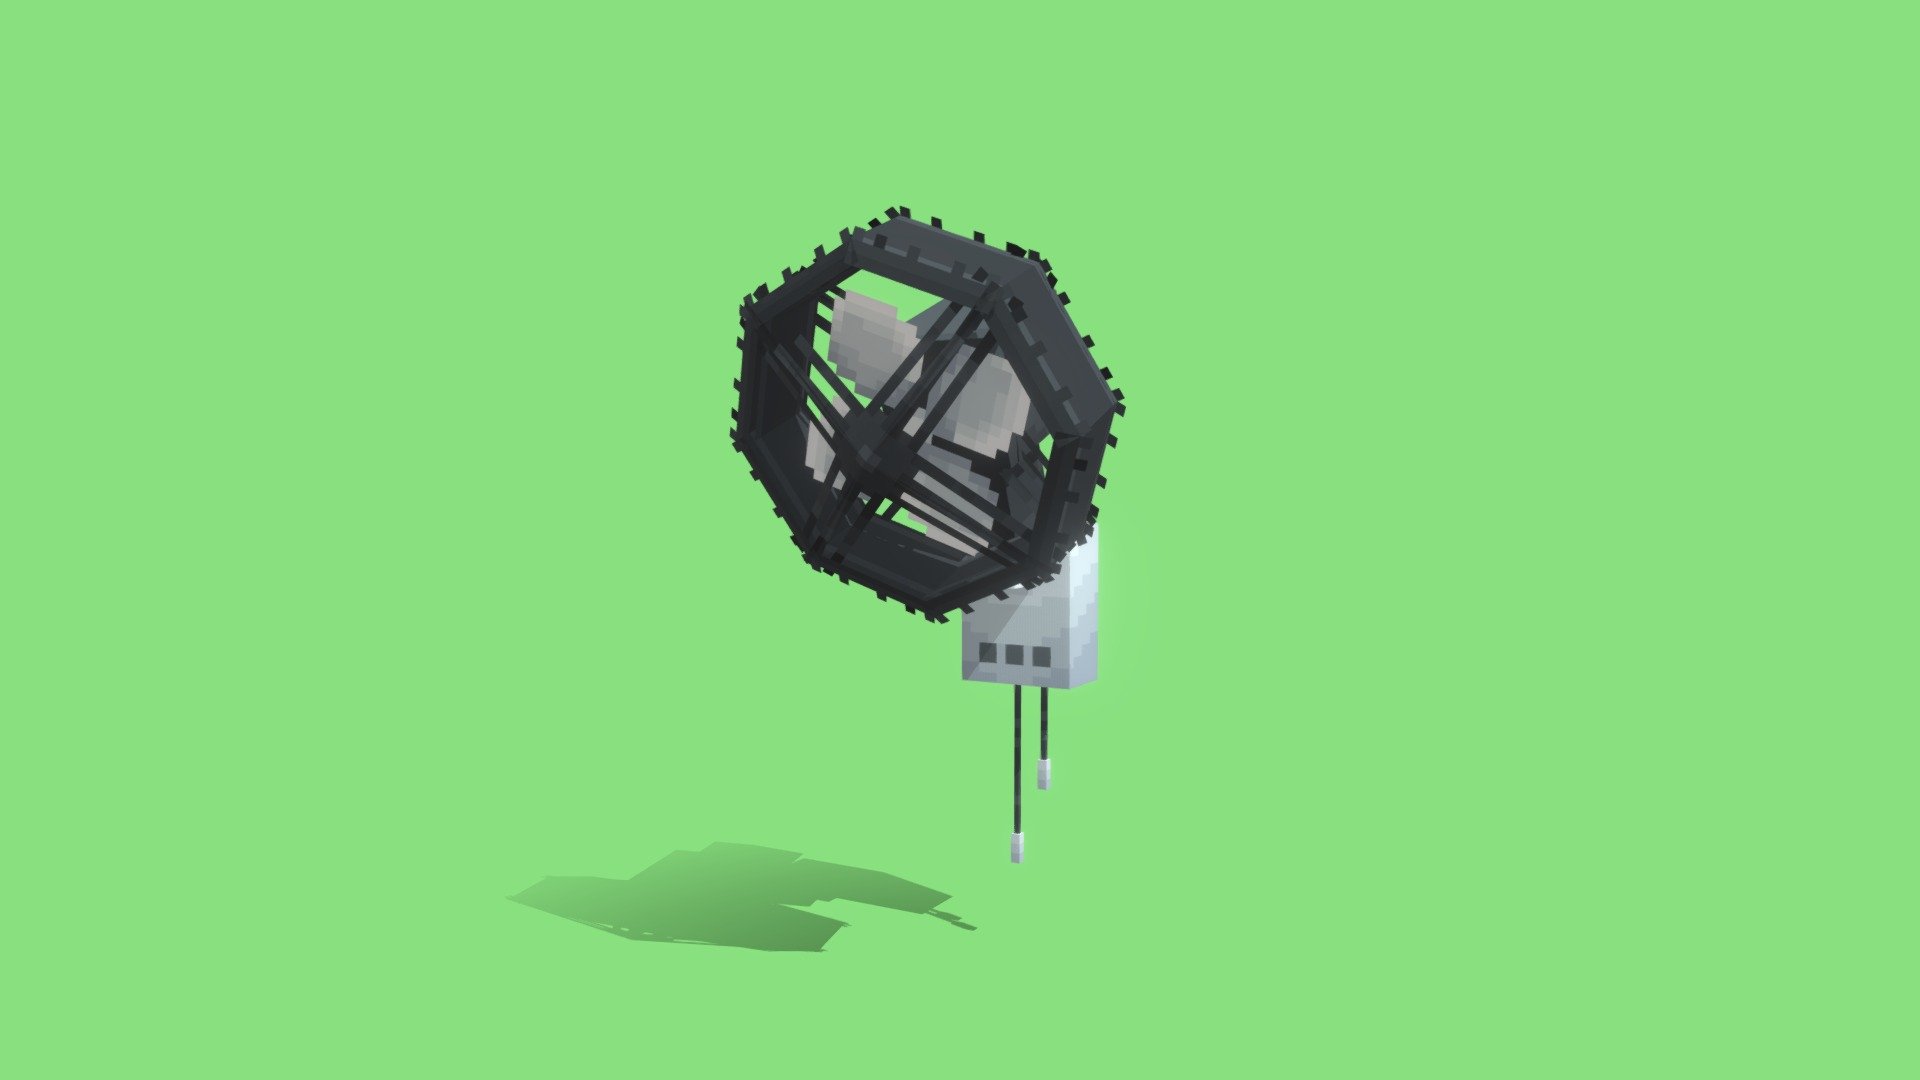 Wall mounted fan designed and textured by me. Model created using Blockbench.

Contains 42 elements 3d model